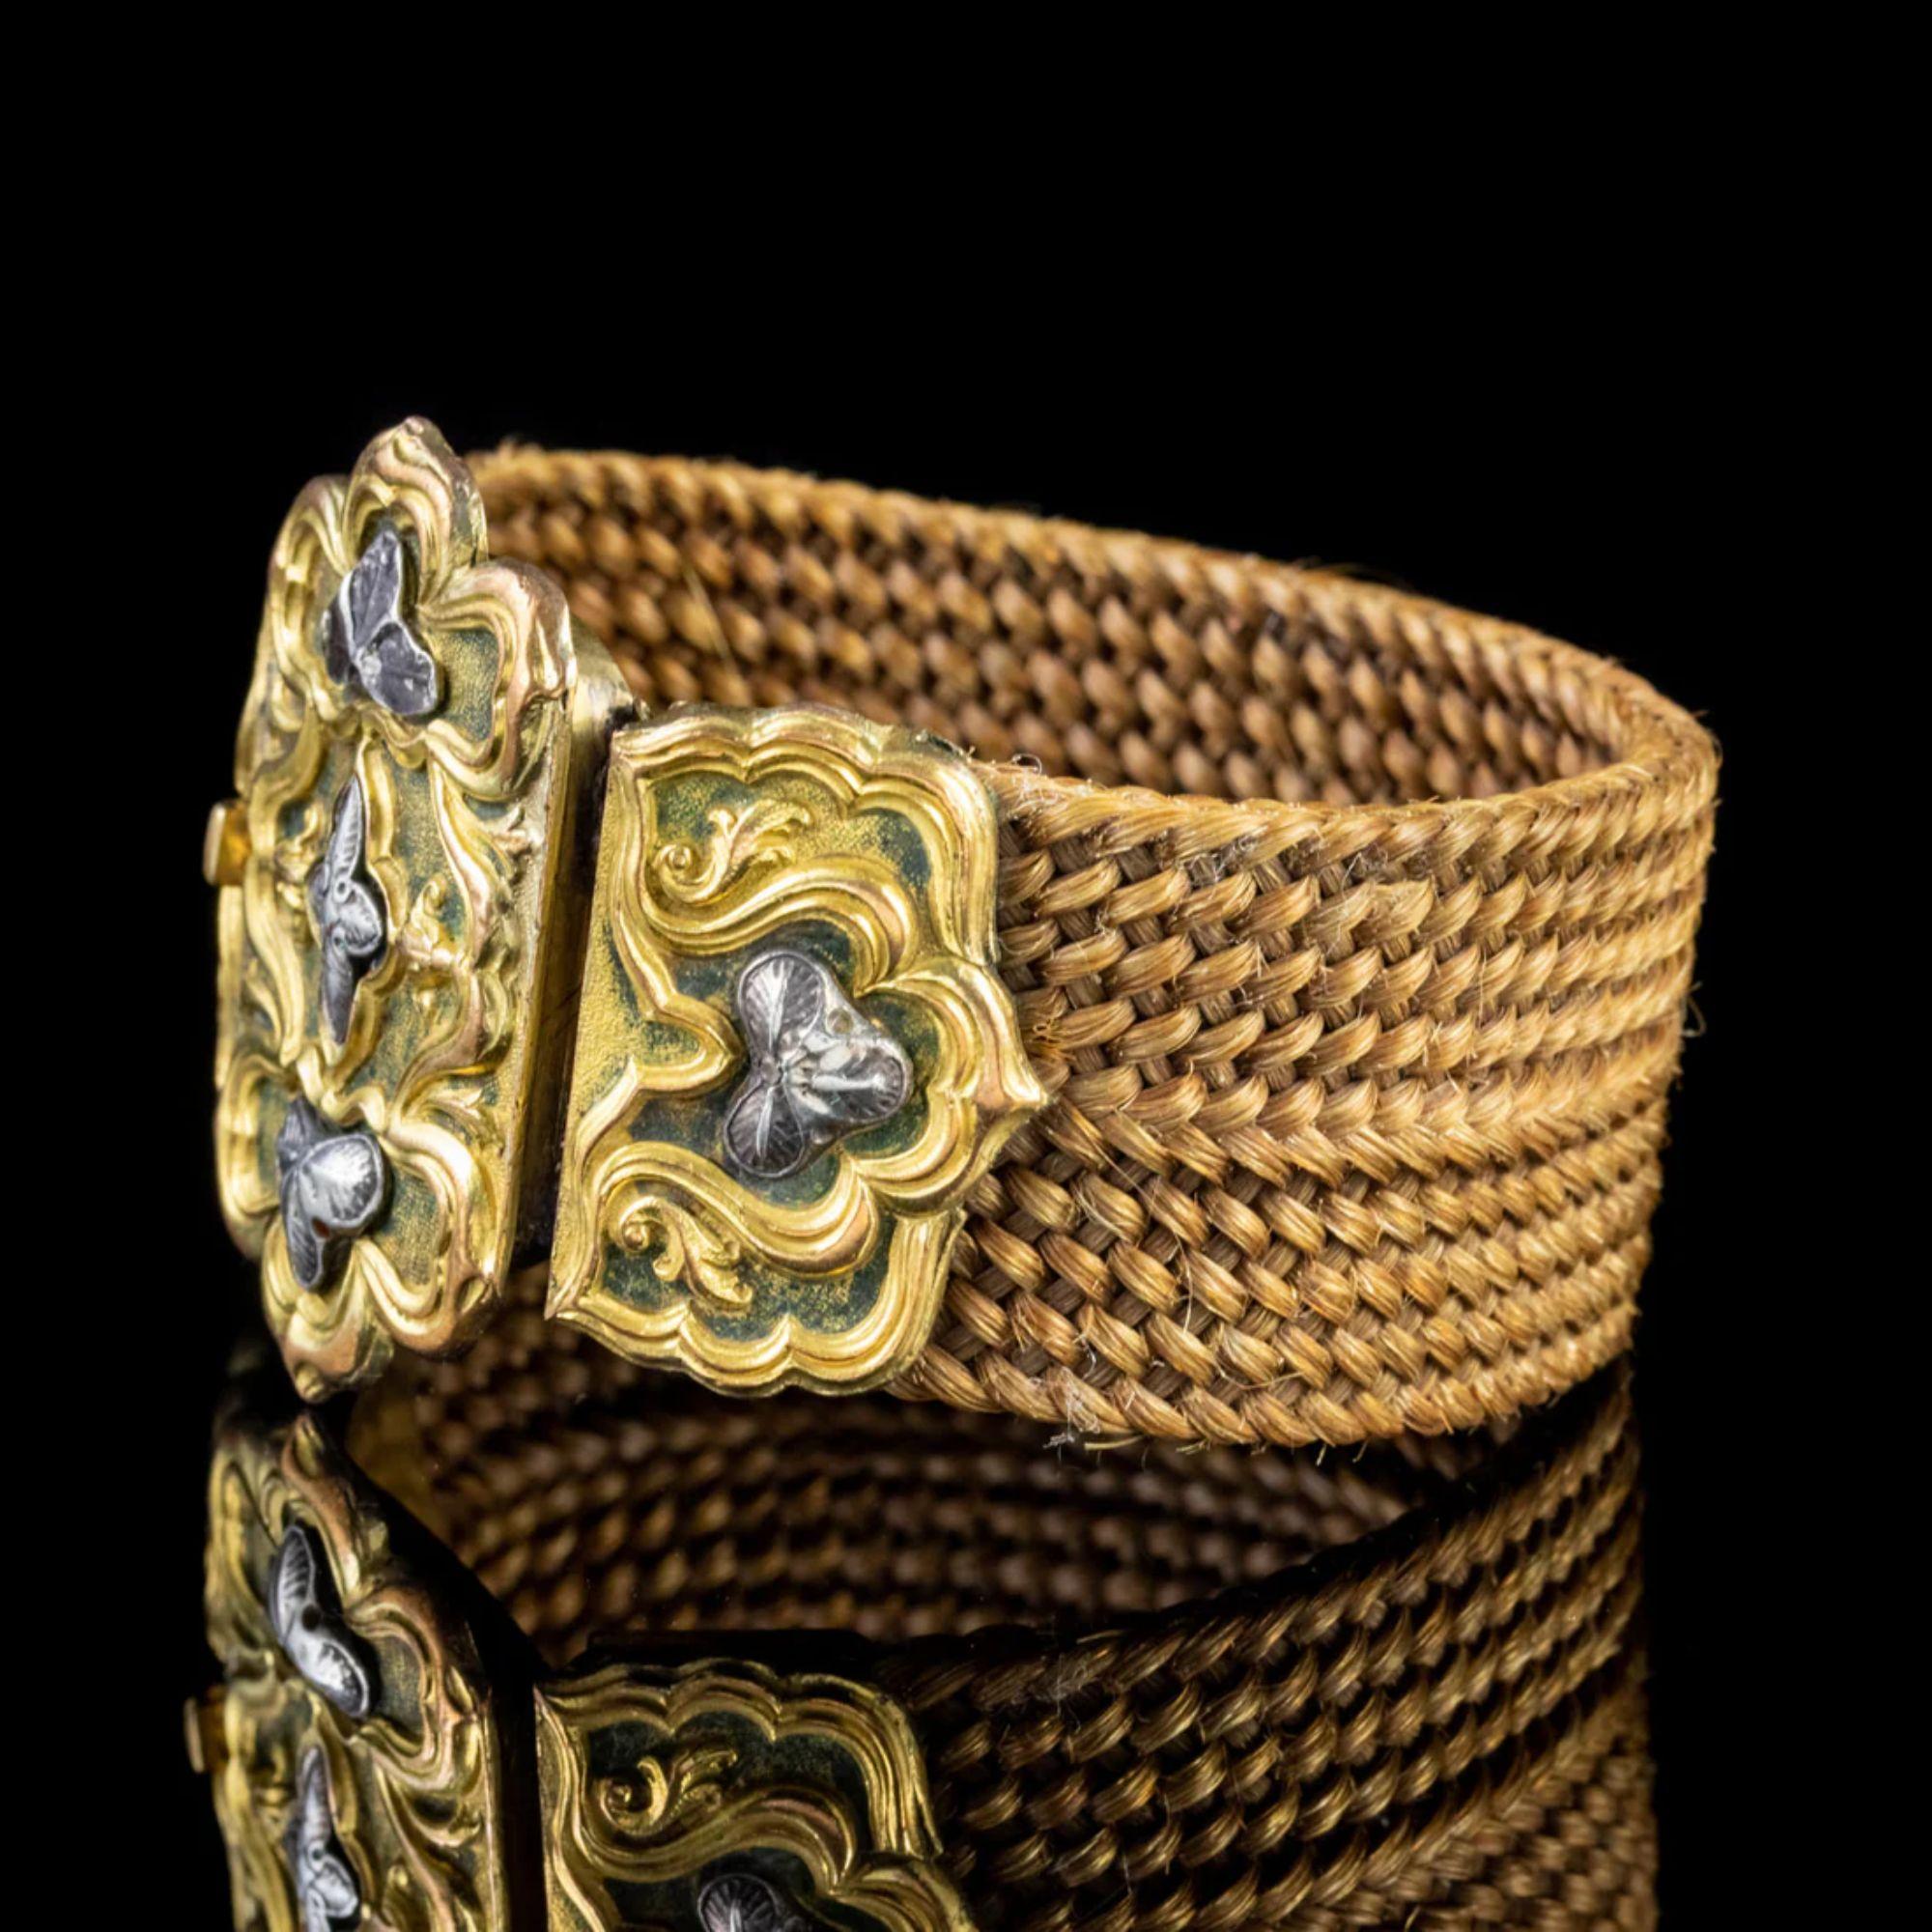 A grand antique Georgian bracelet from the early 19th Century consisting of a thick band of braided hair which is tightly woven and a lovely shade of golden brown.

The band is fitted to a large, ornate box clasp with a beautiful, engraved design